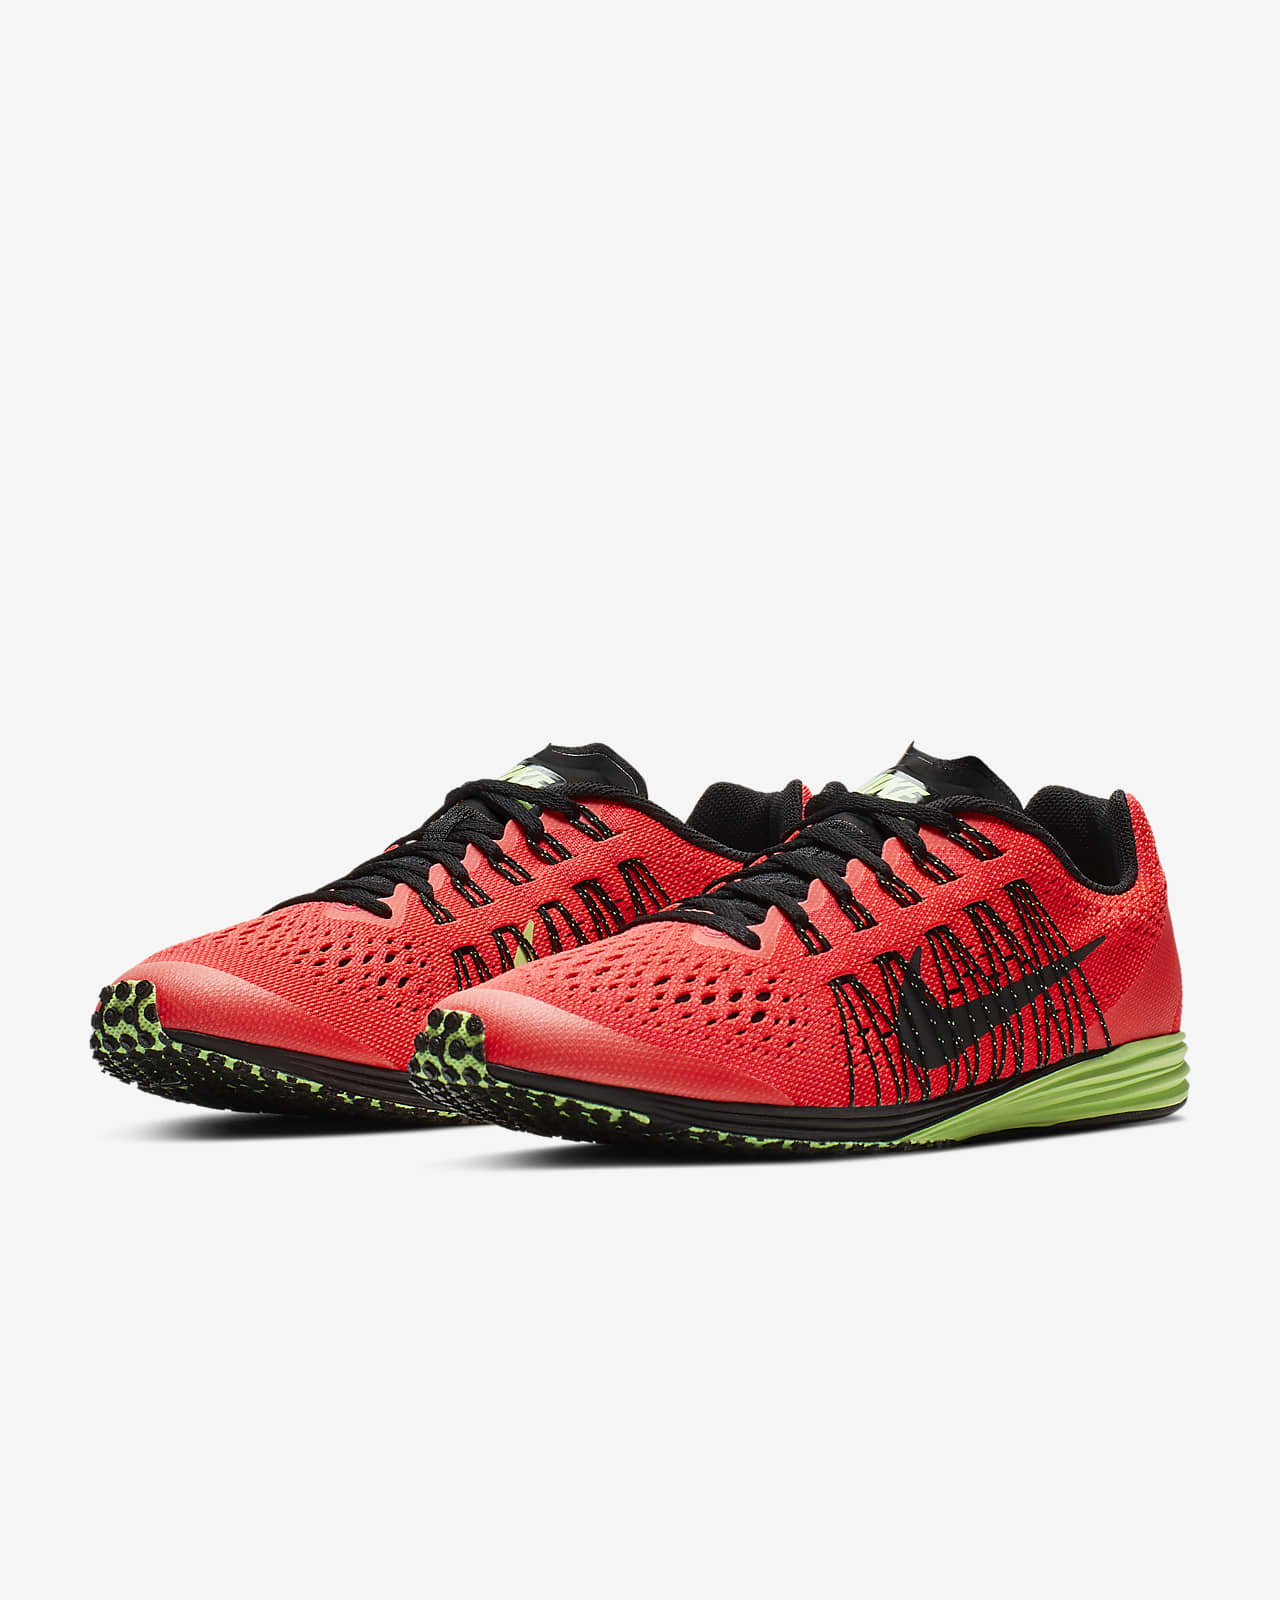 nike lunarspider r6 racing shoes, Up to 